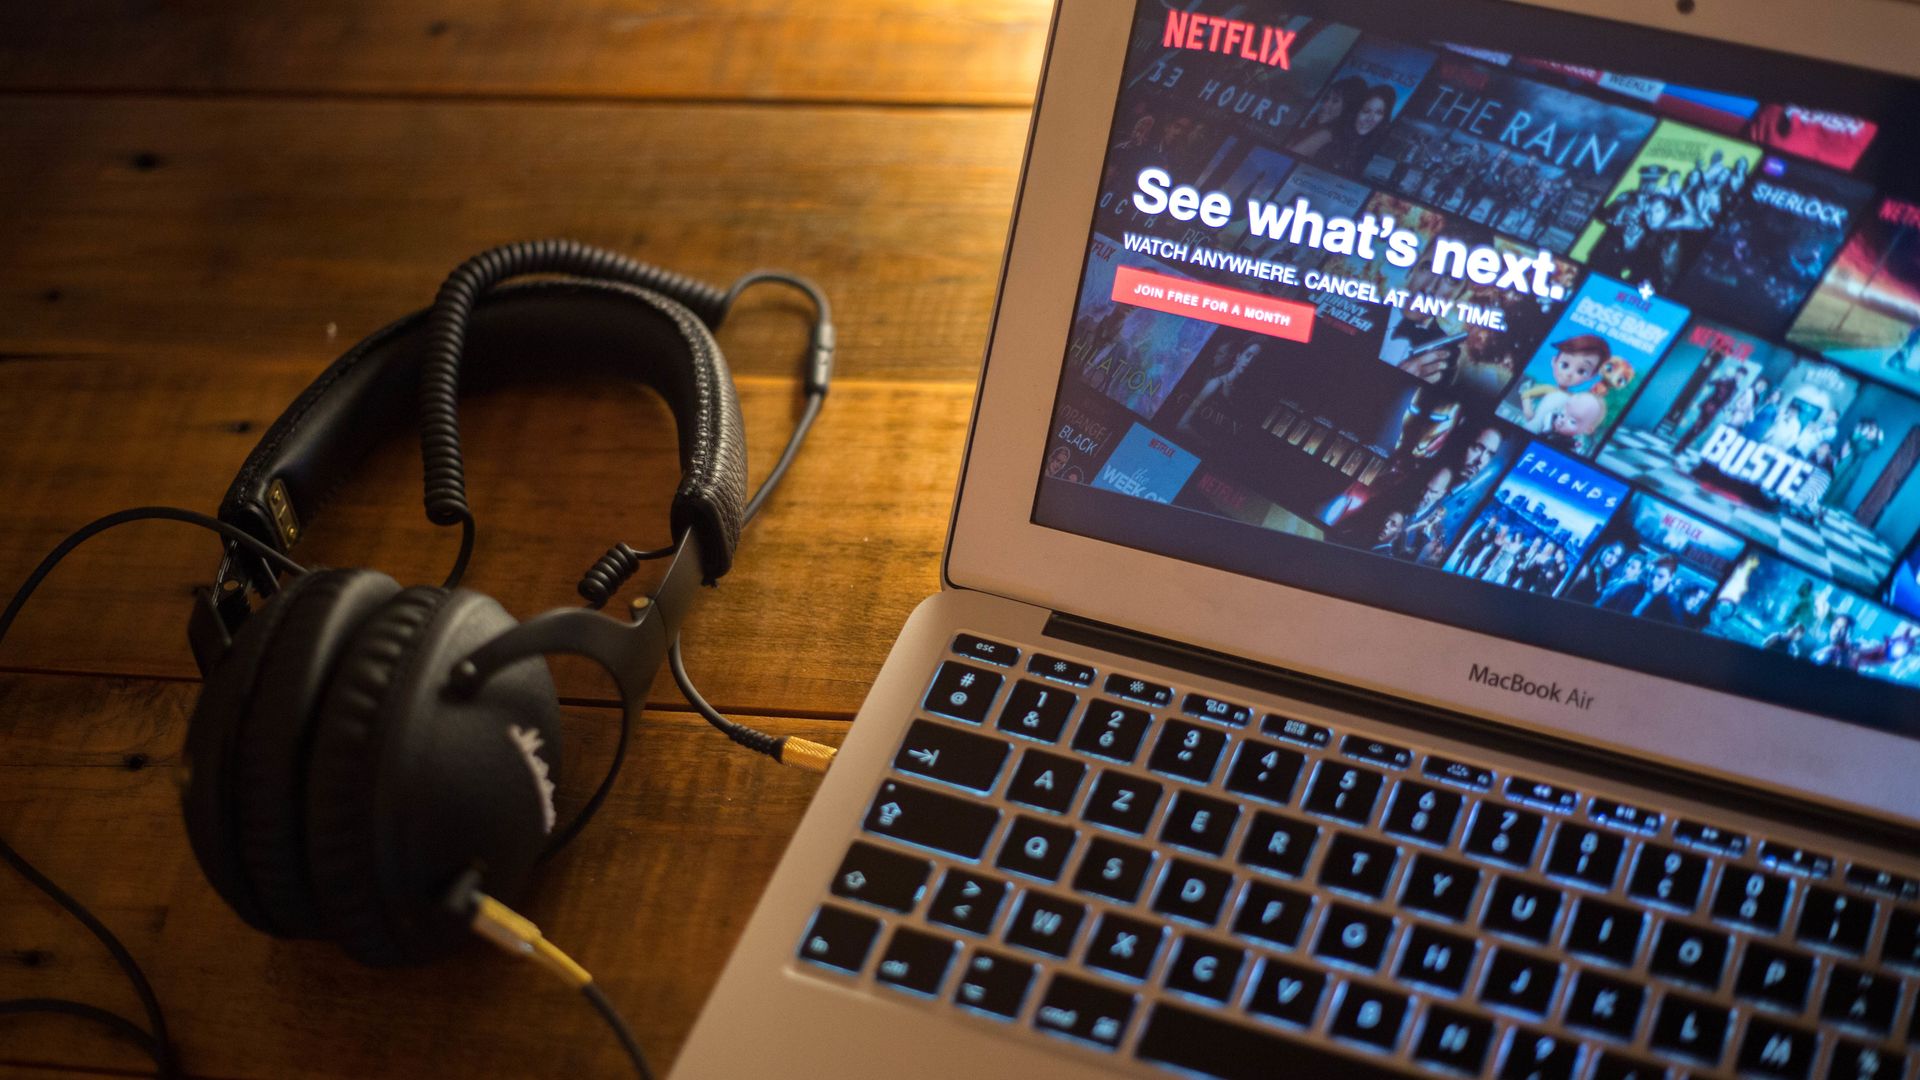 A pair of headphones next to a laptop, with the Netflix homepage pulled up.